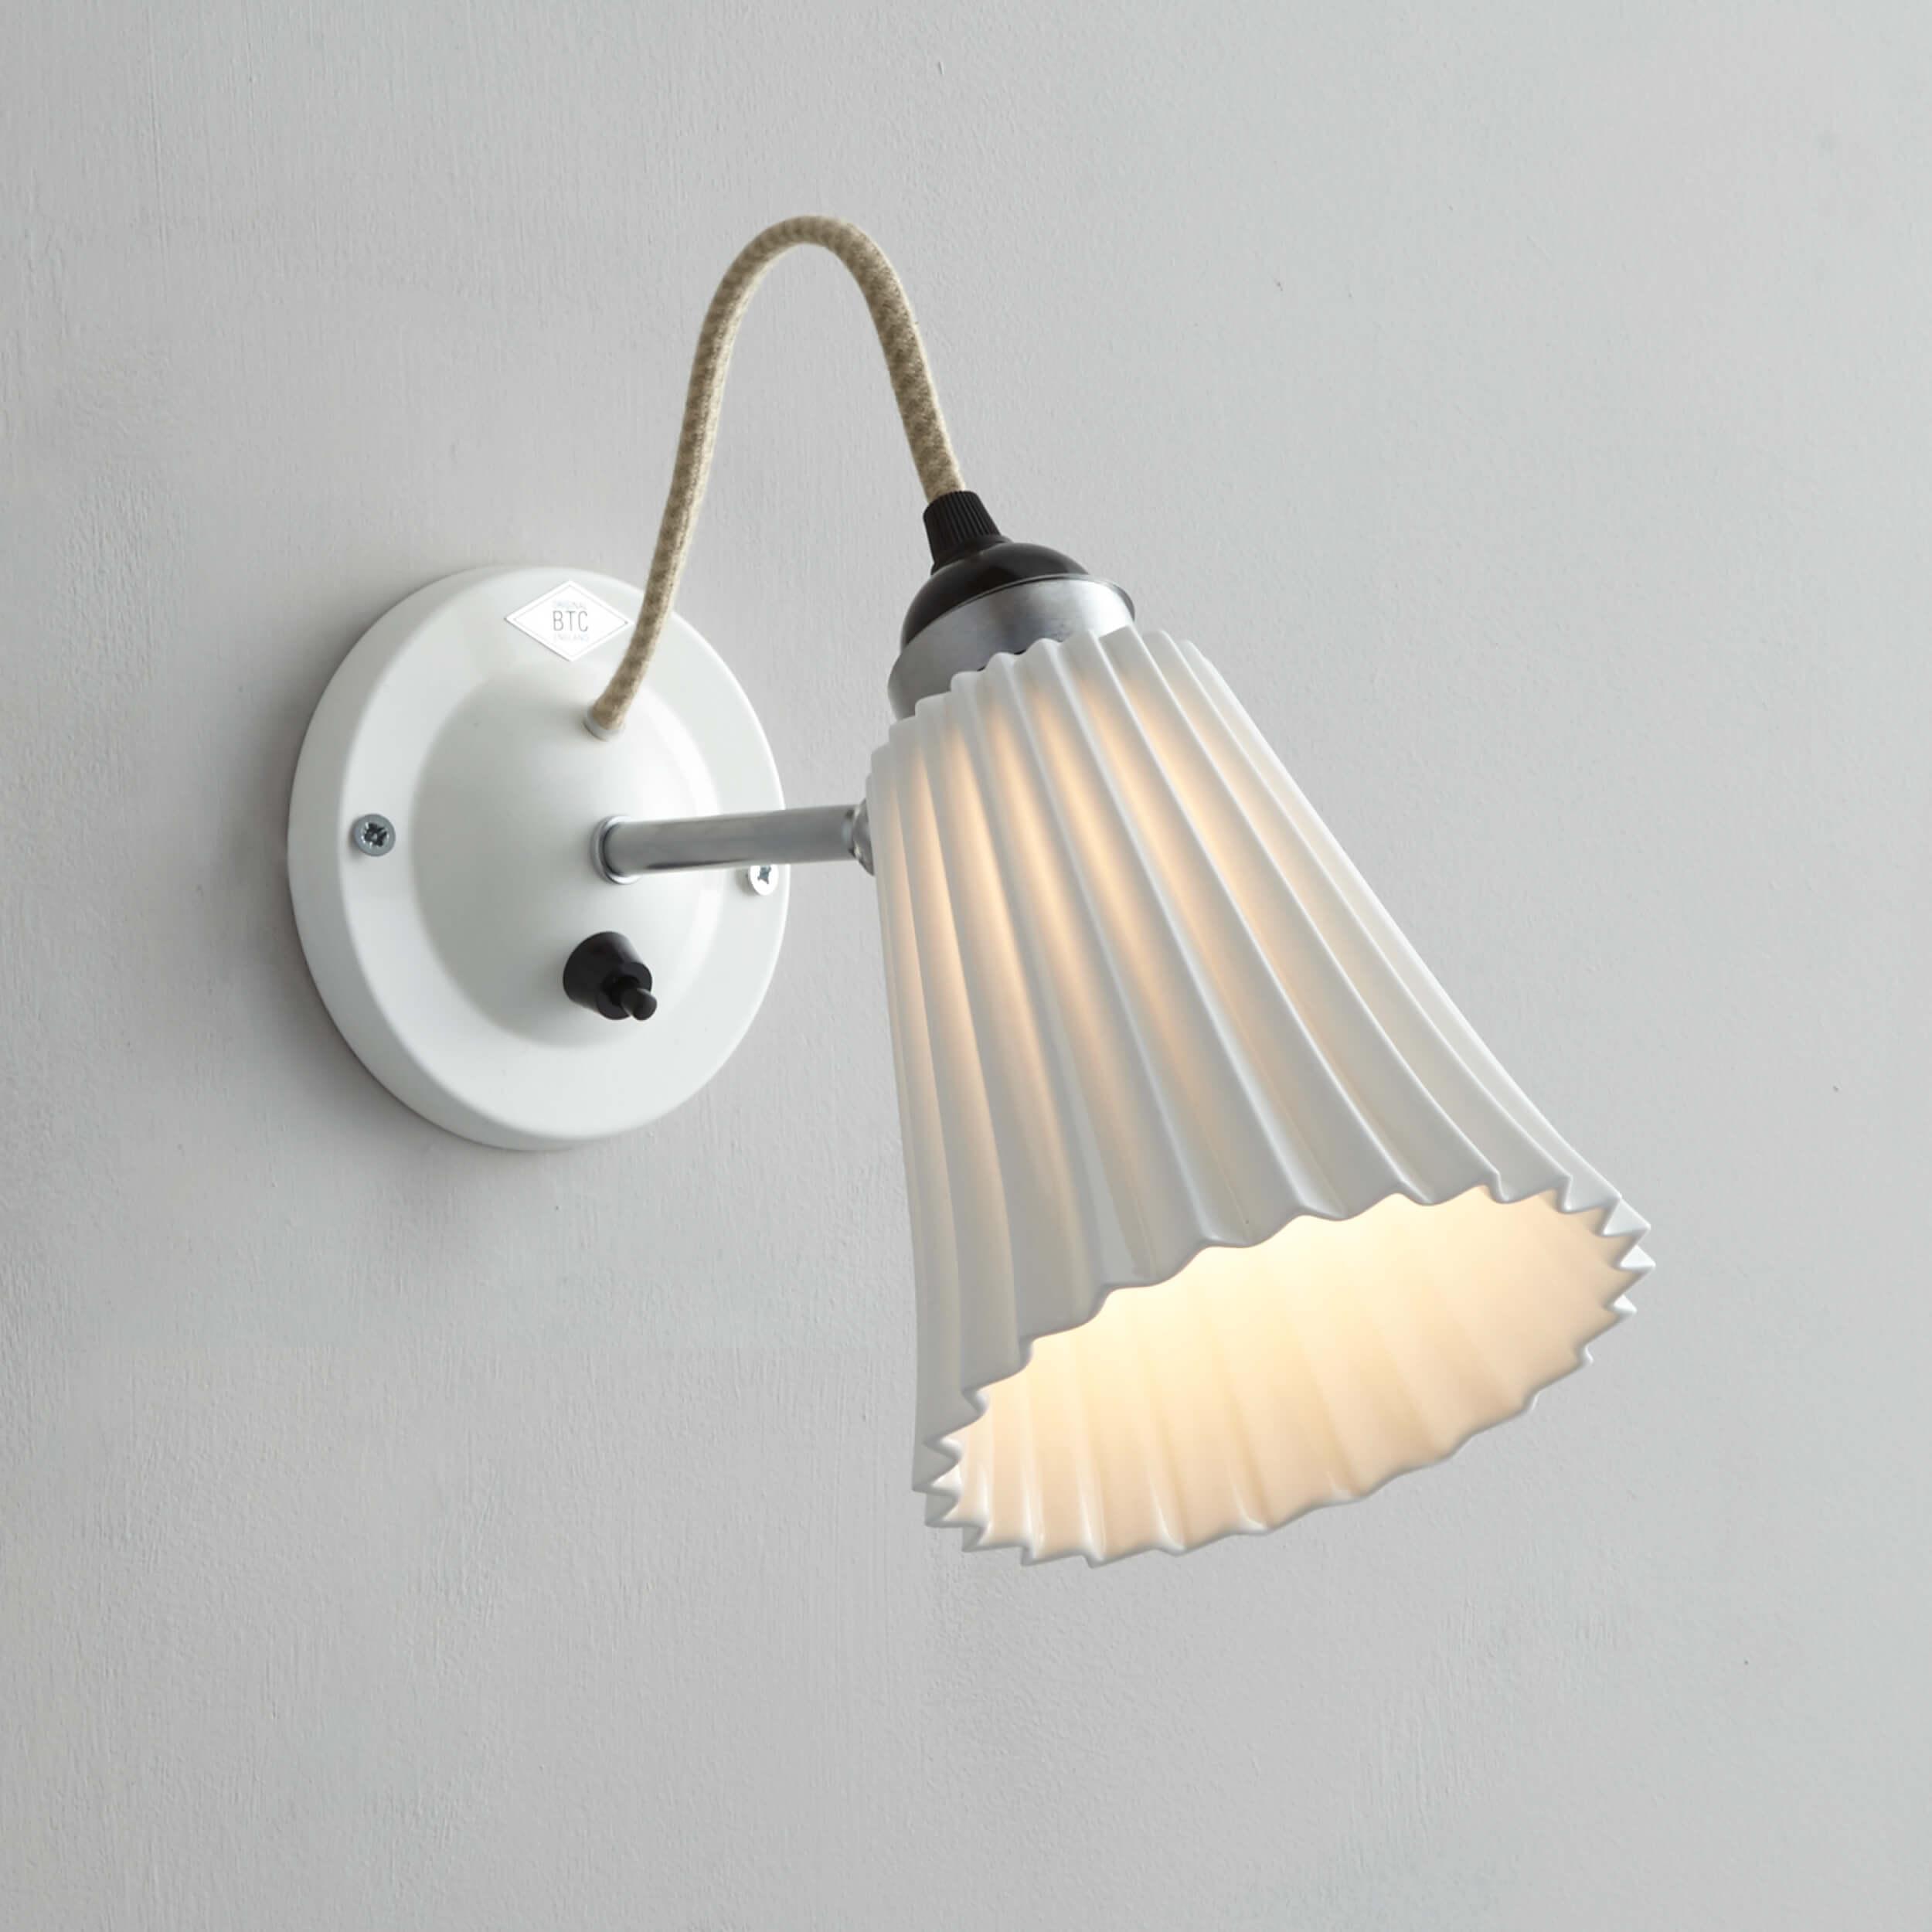 Original BTC - Hector Pleat Switched Wall Light - US-FW507N | Montreal Lighting & Hardware